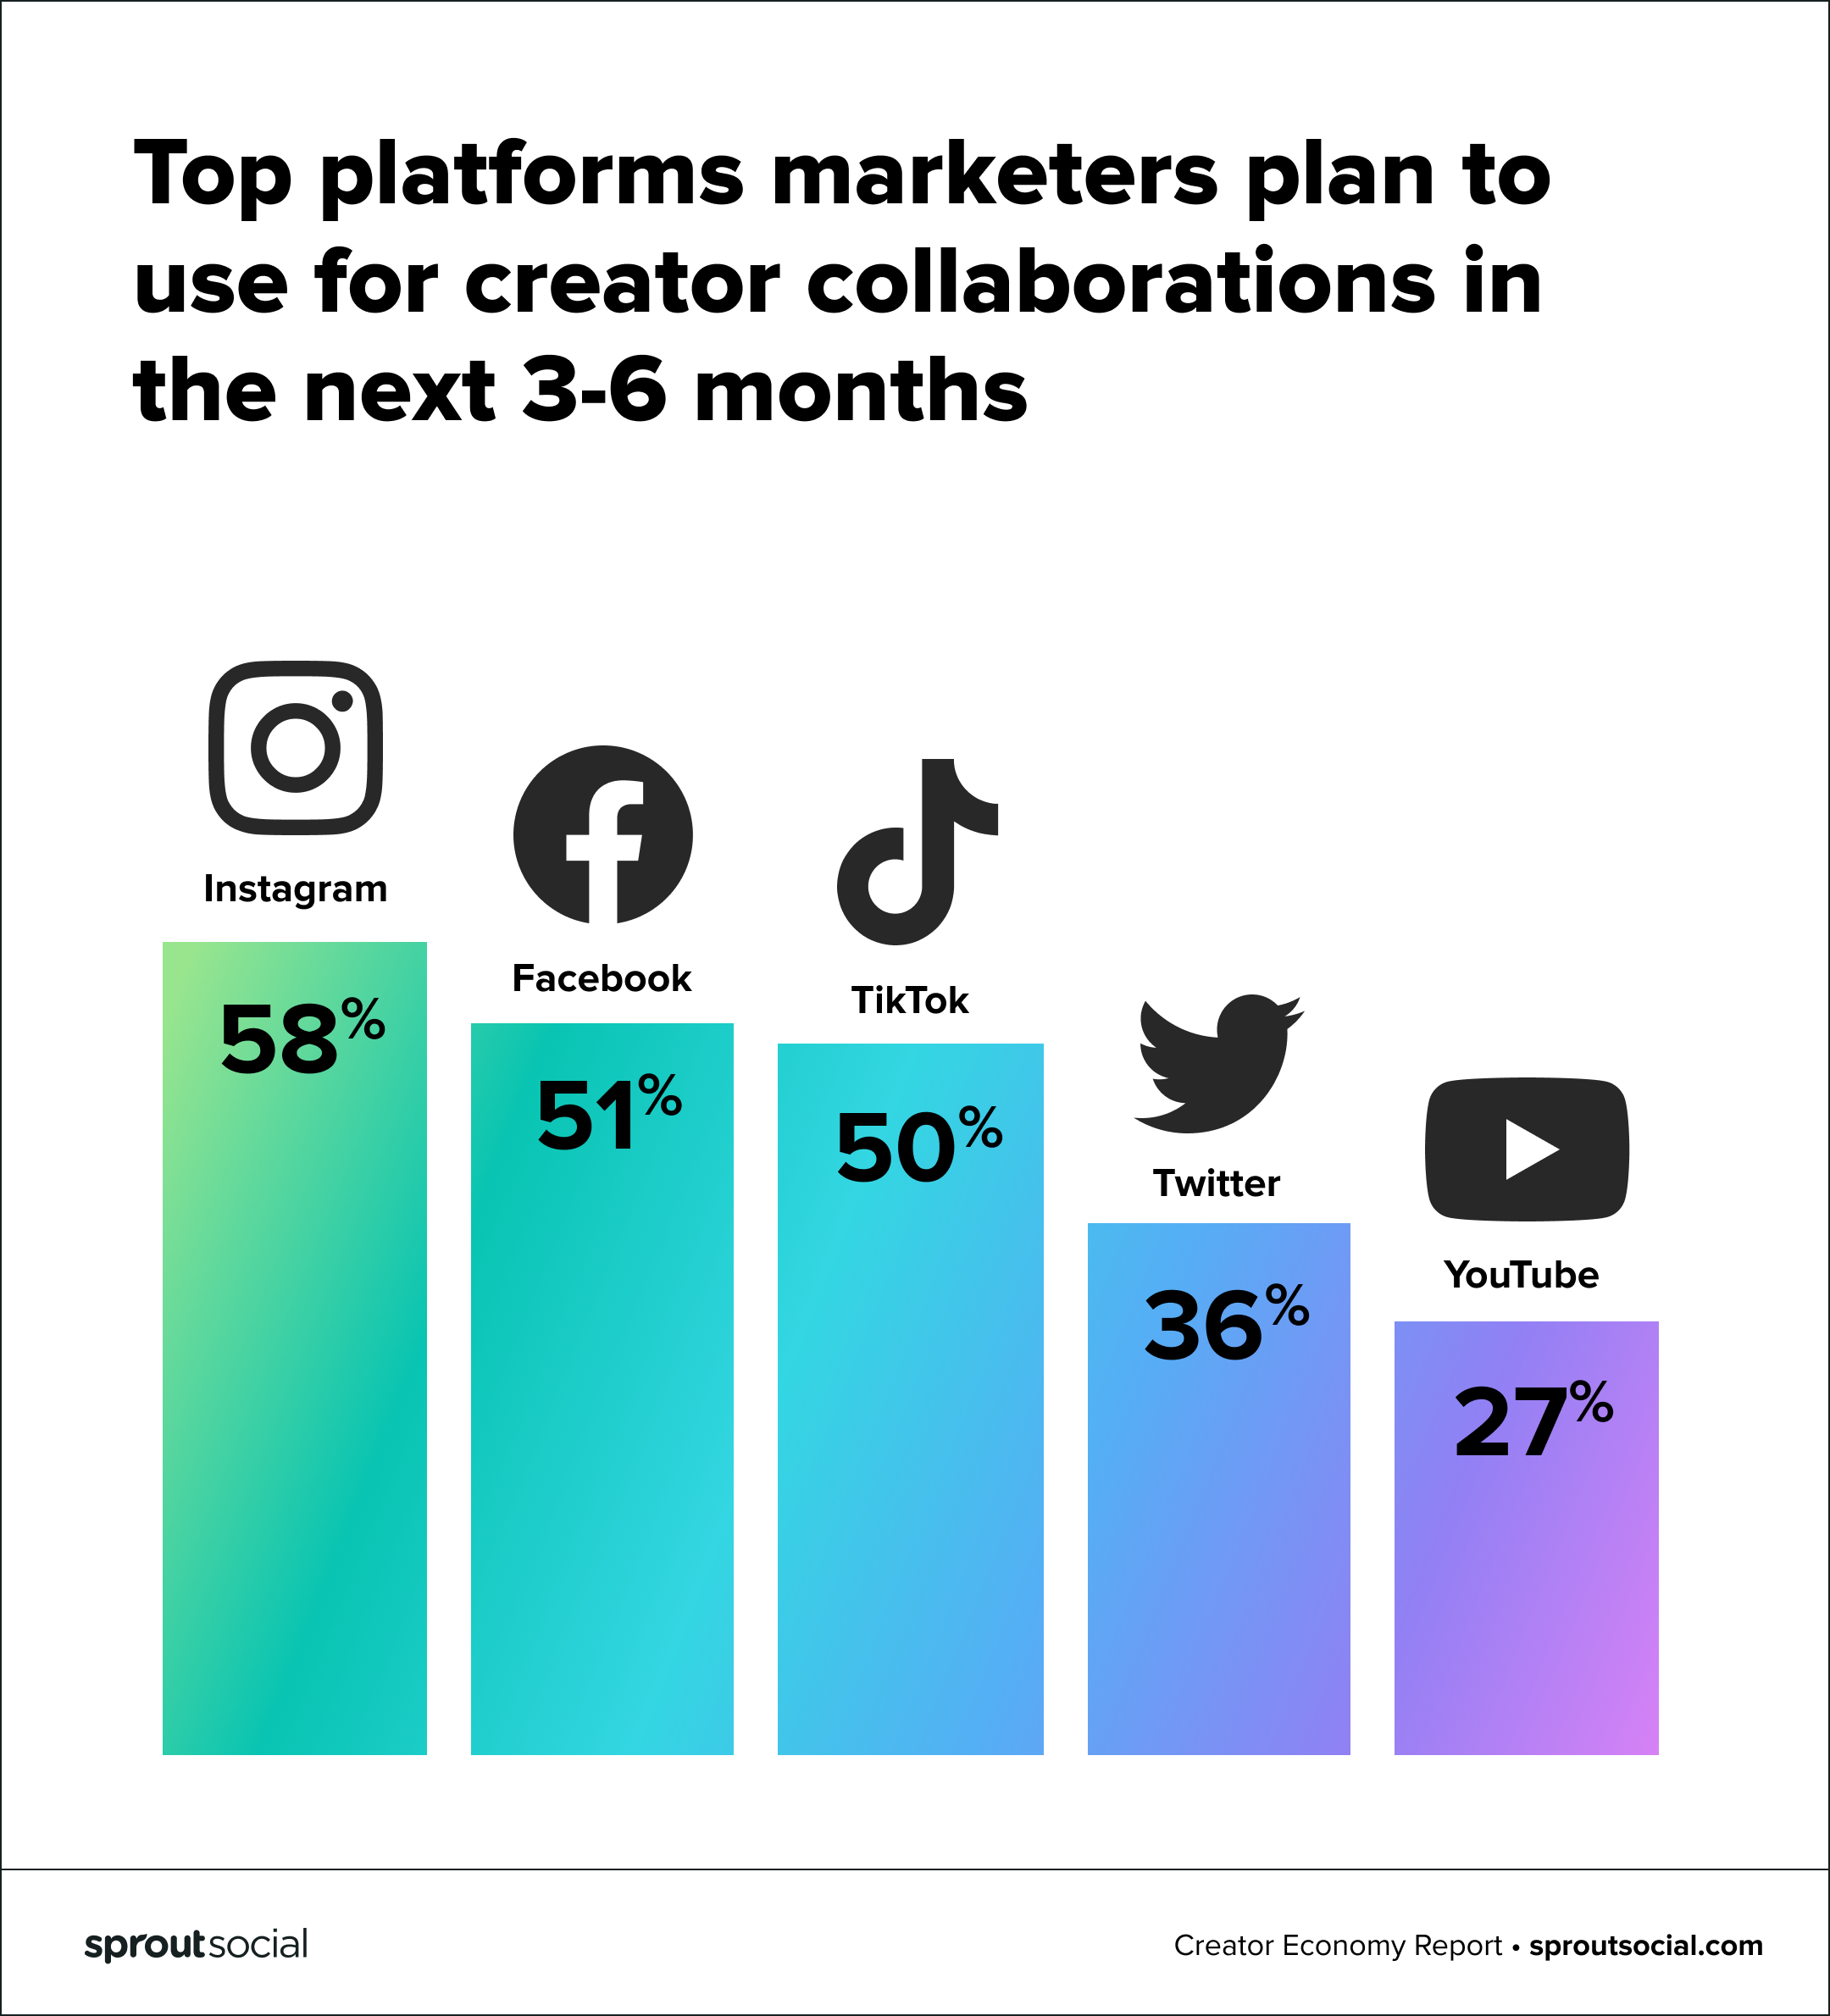 Graph of the top social platforms marketers plan to use for creator collaborations in the next 3-6 months